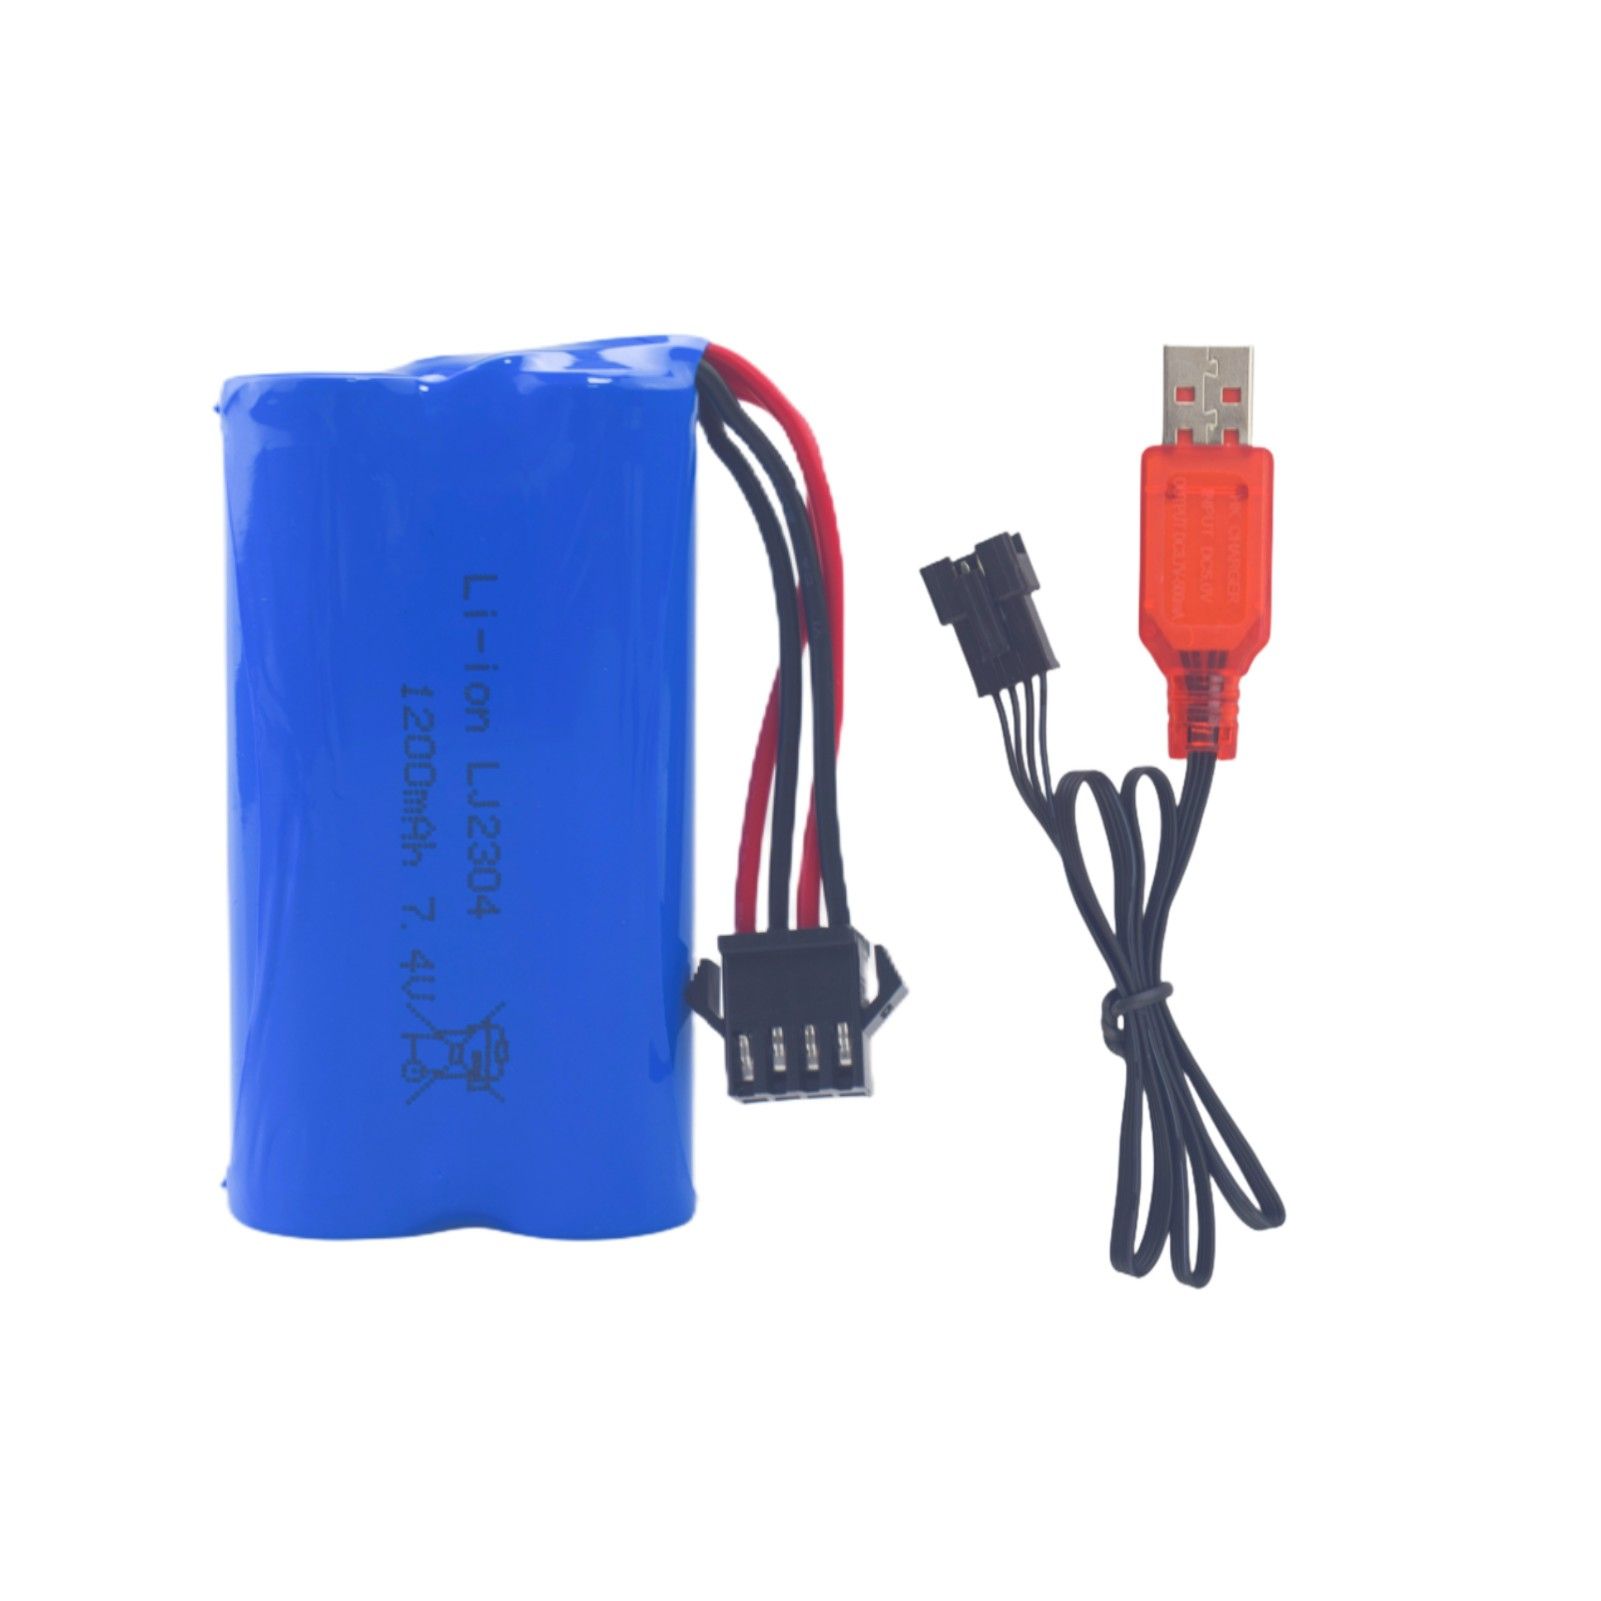 7.4V 1200mAh Lithium Battery Replacement Battery for Remote Control Car 